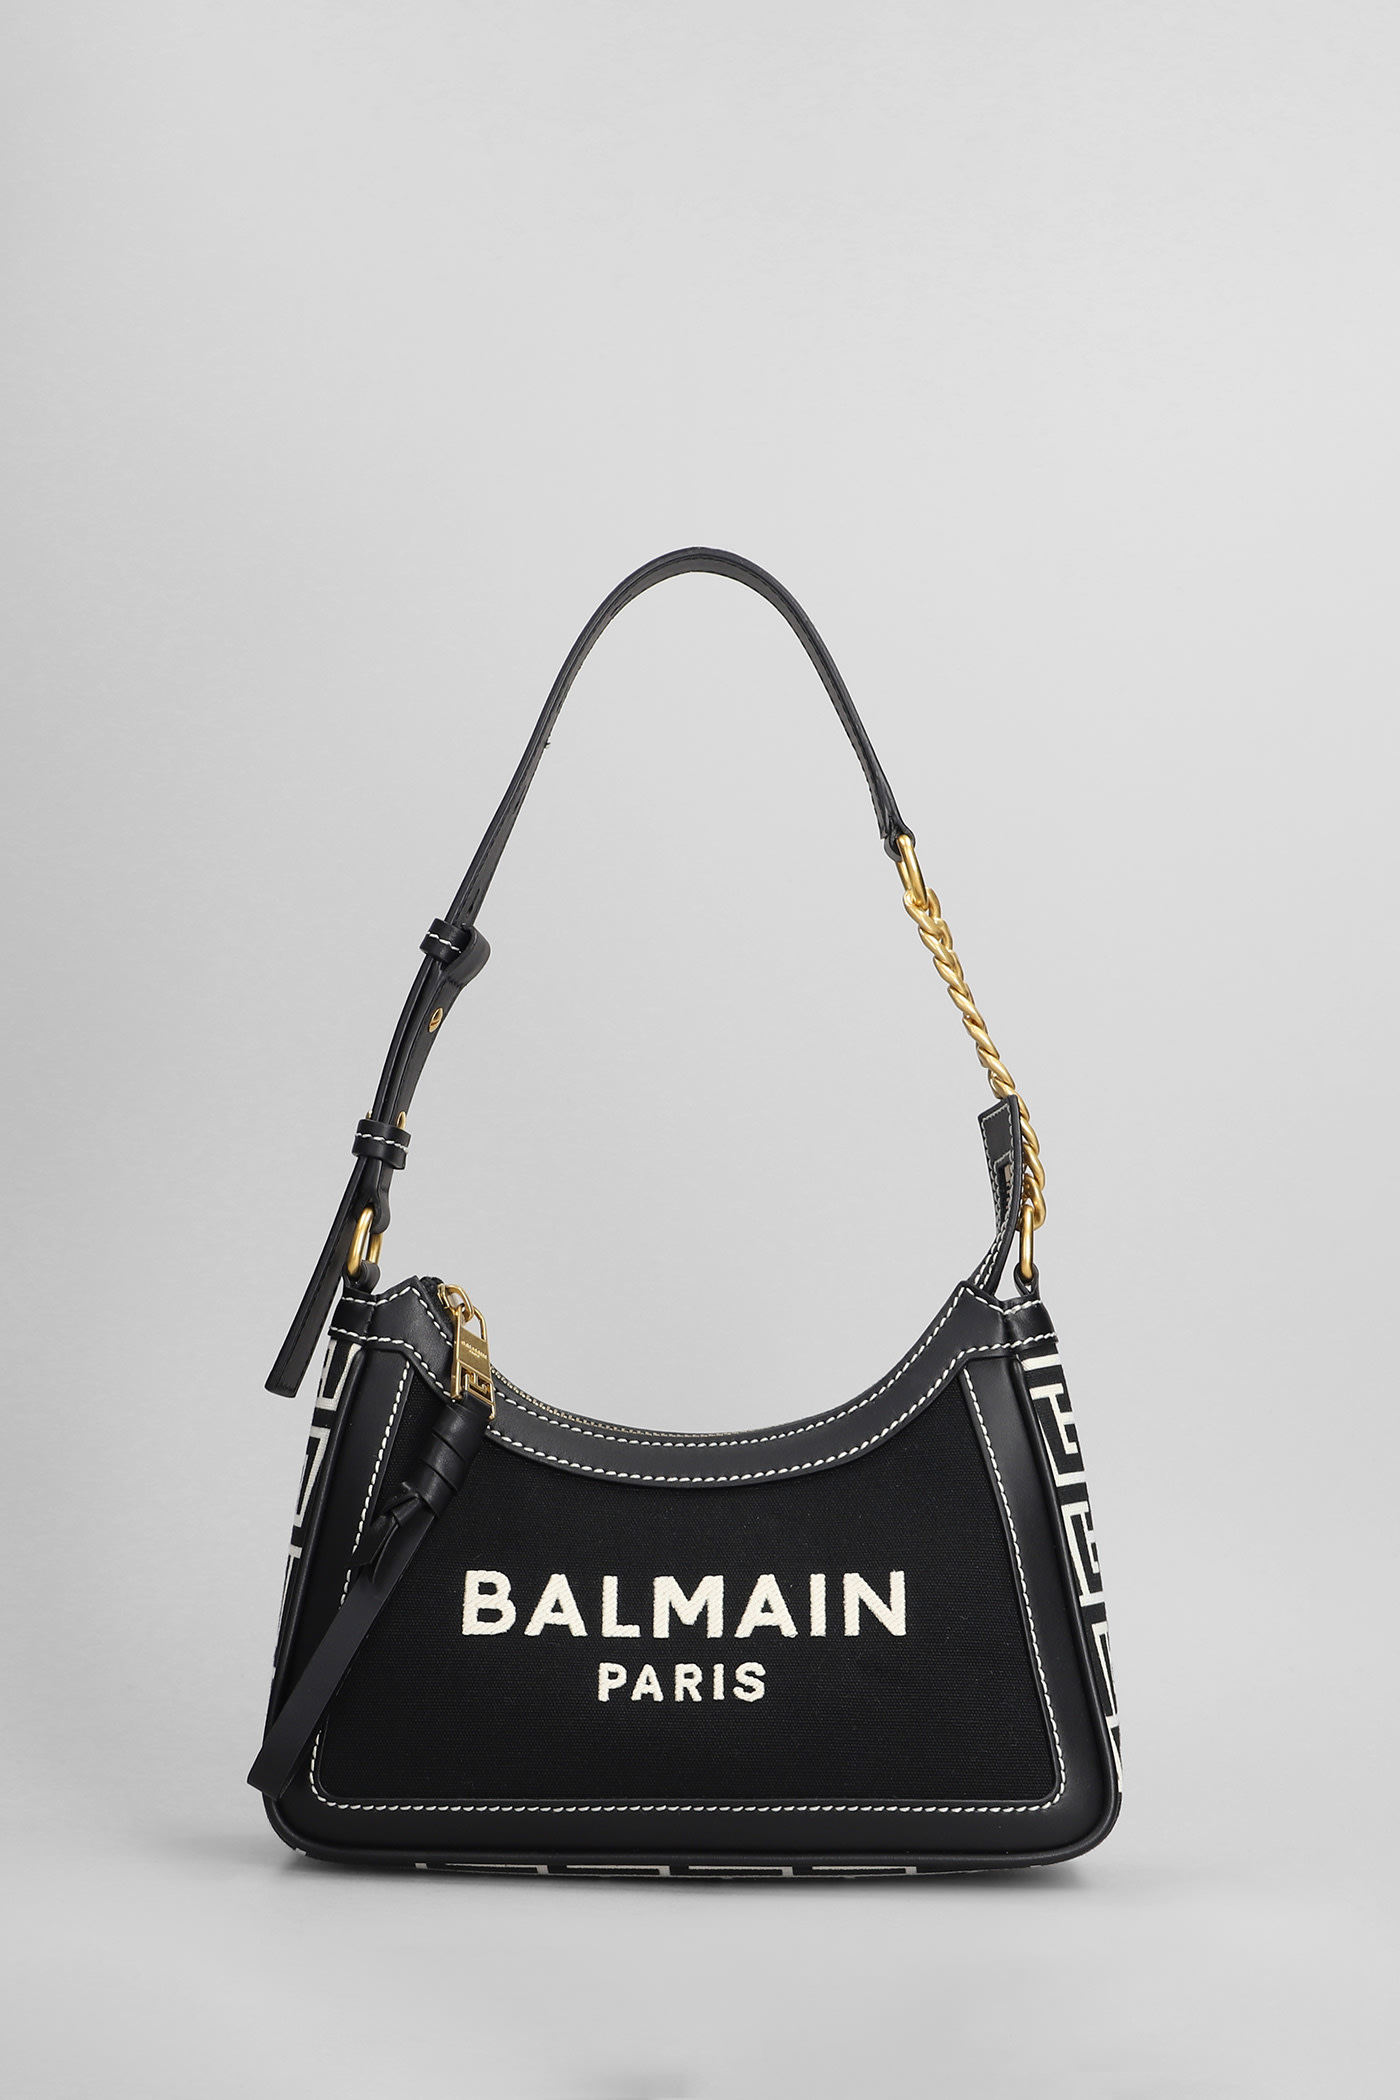 B Army Shoulder Bag In Black Leather And Fabric